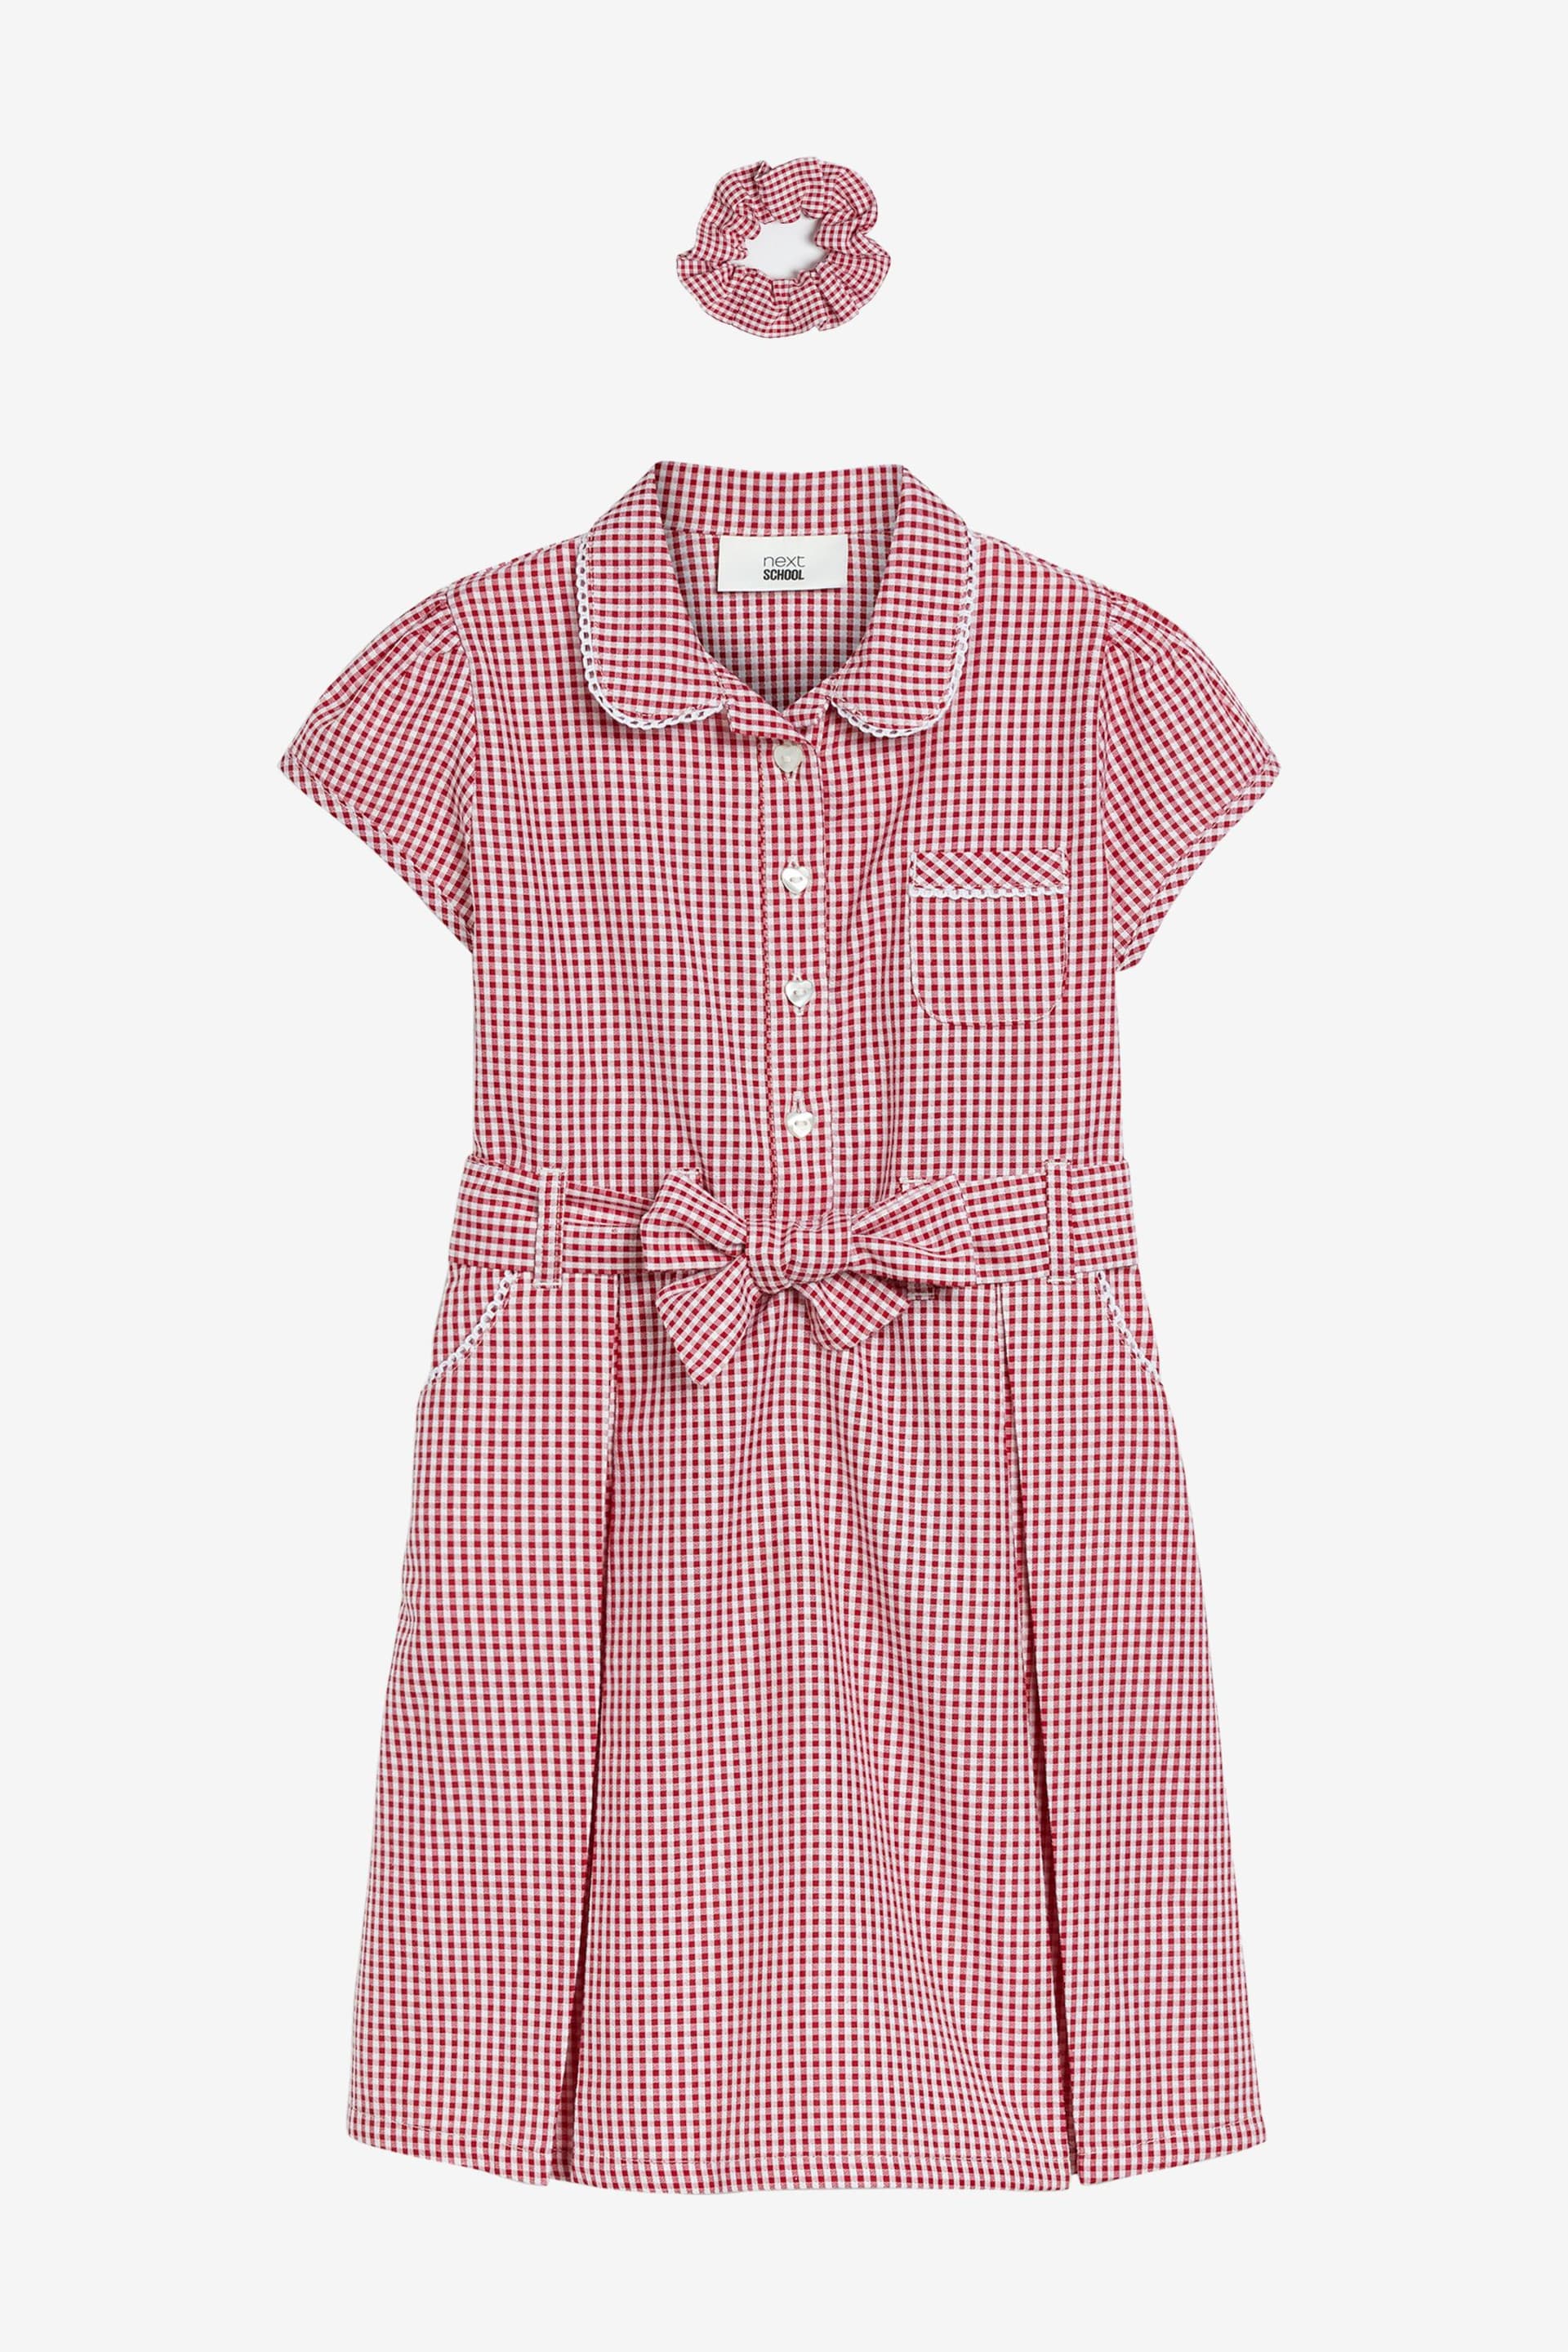 Red Gingham Cotton Rich Belted School Dress With Scrunchie (3-14yrs) - Image 5 of 9